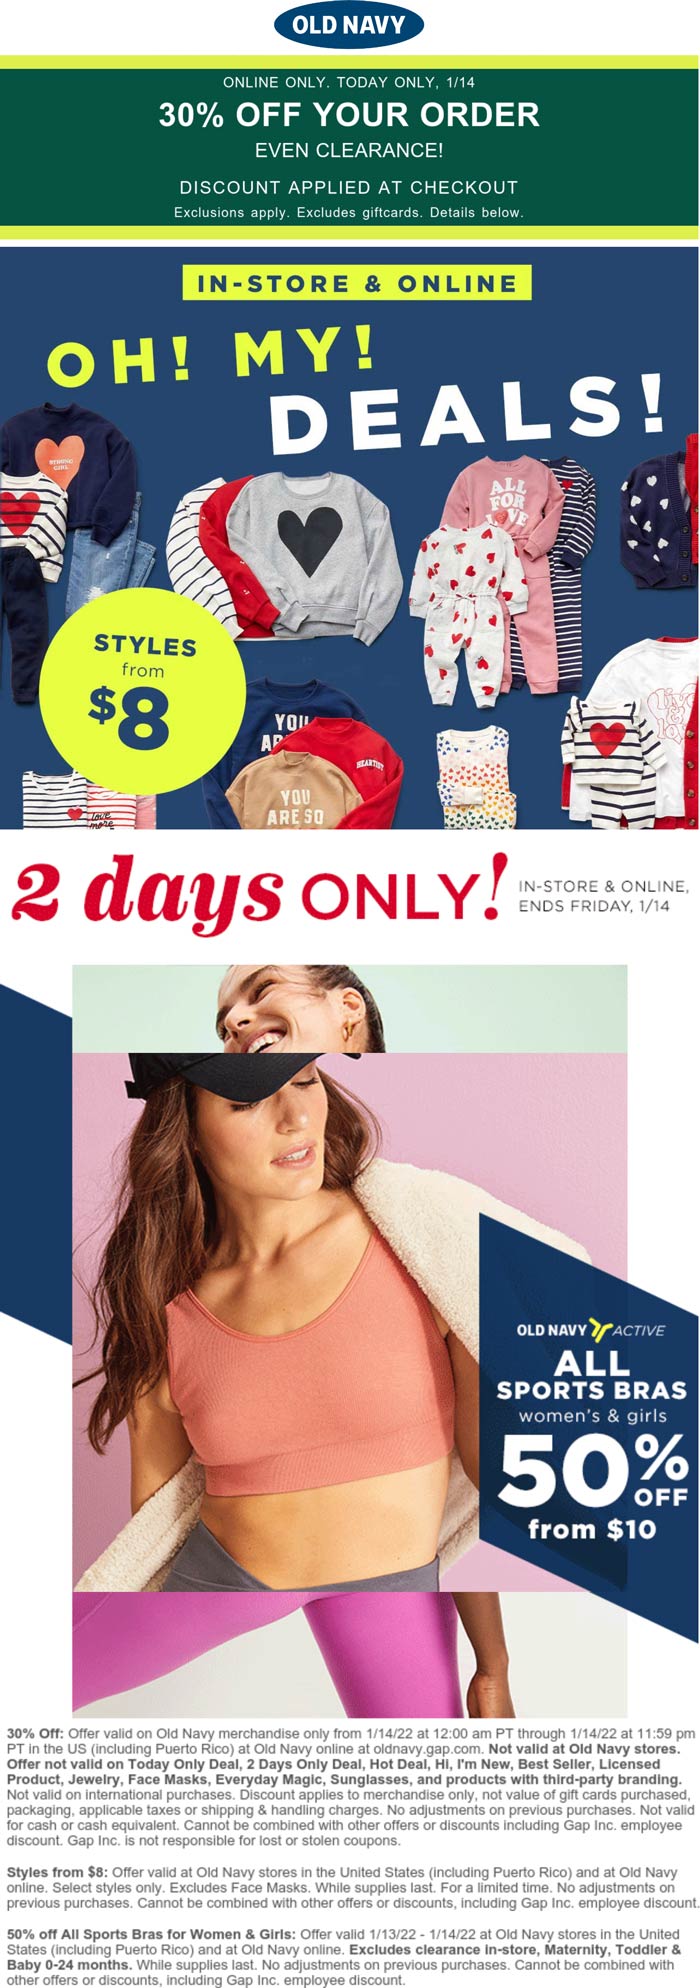 Old Navy stores Coupon  50% off sports bras & 30% off everything else online today at Old Navy #oldnavy 